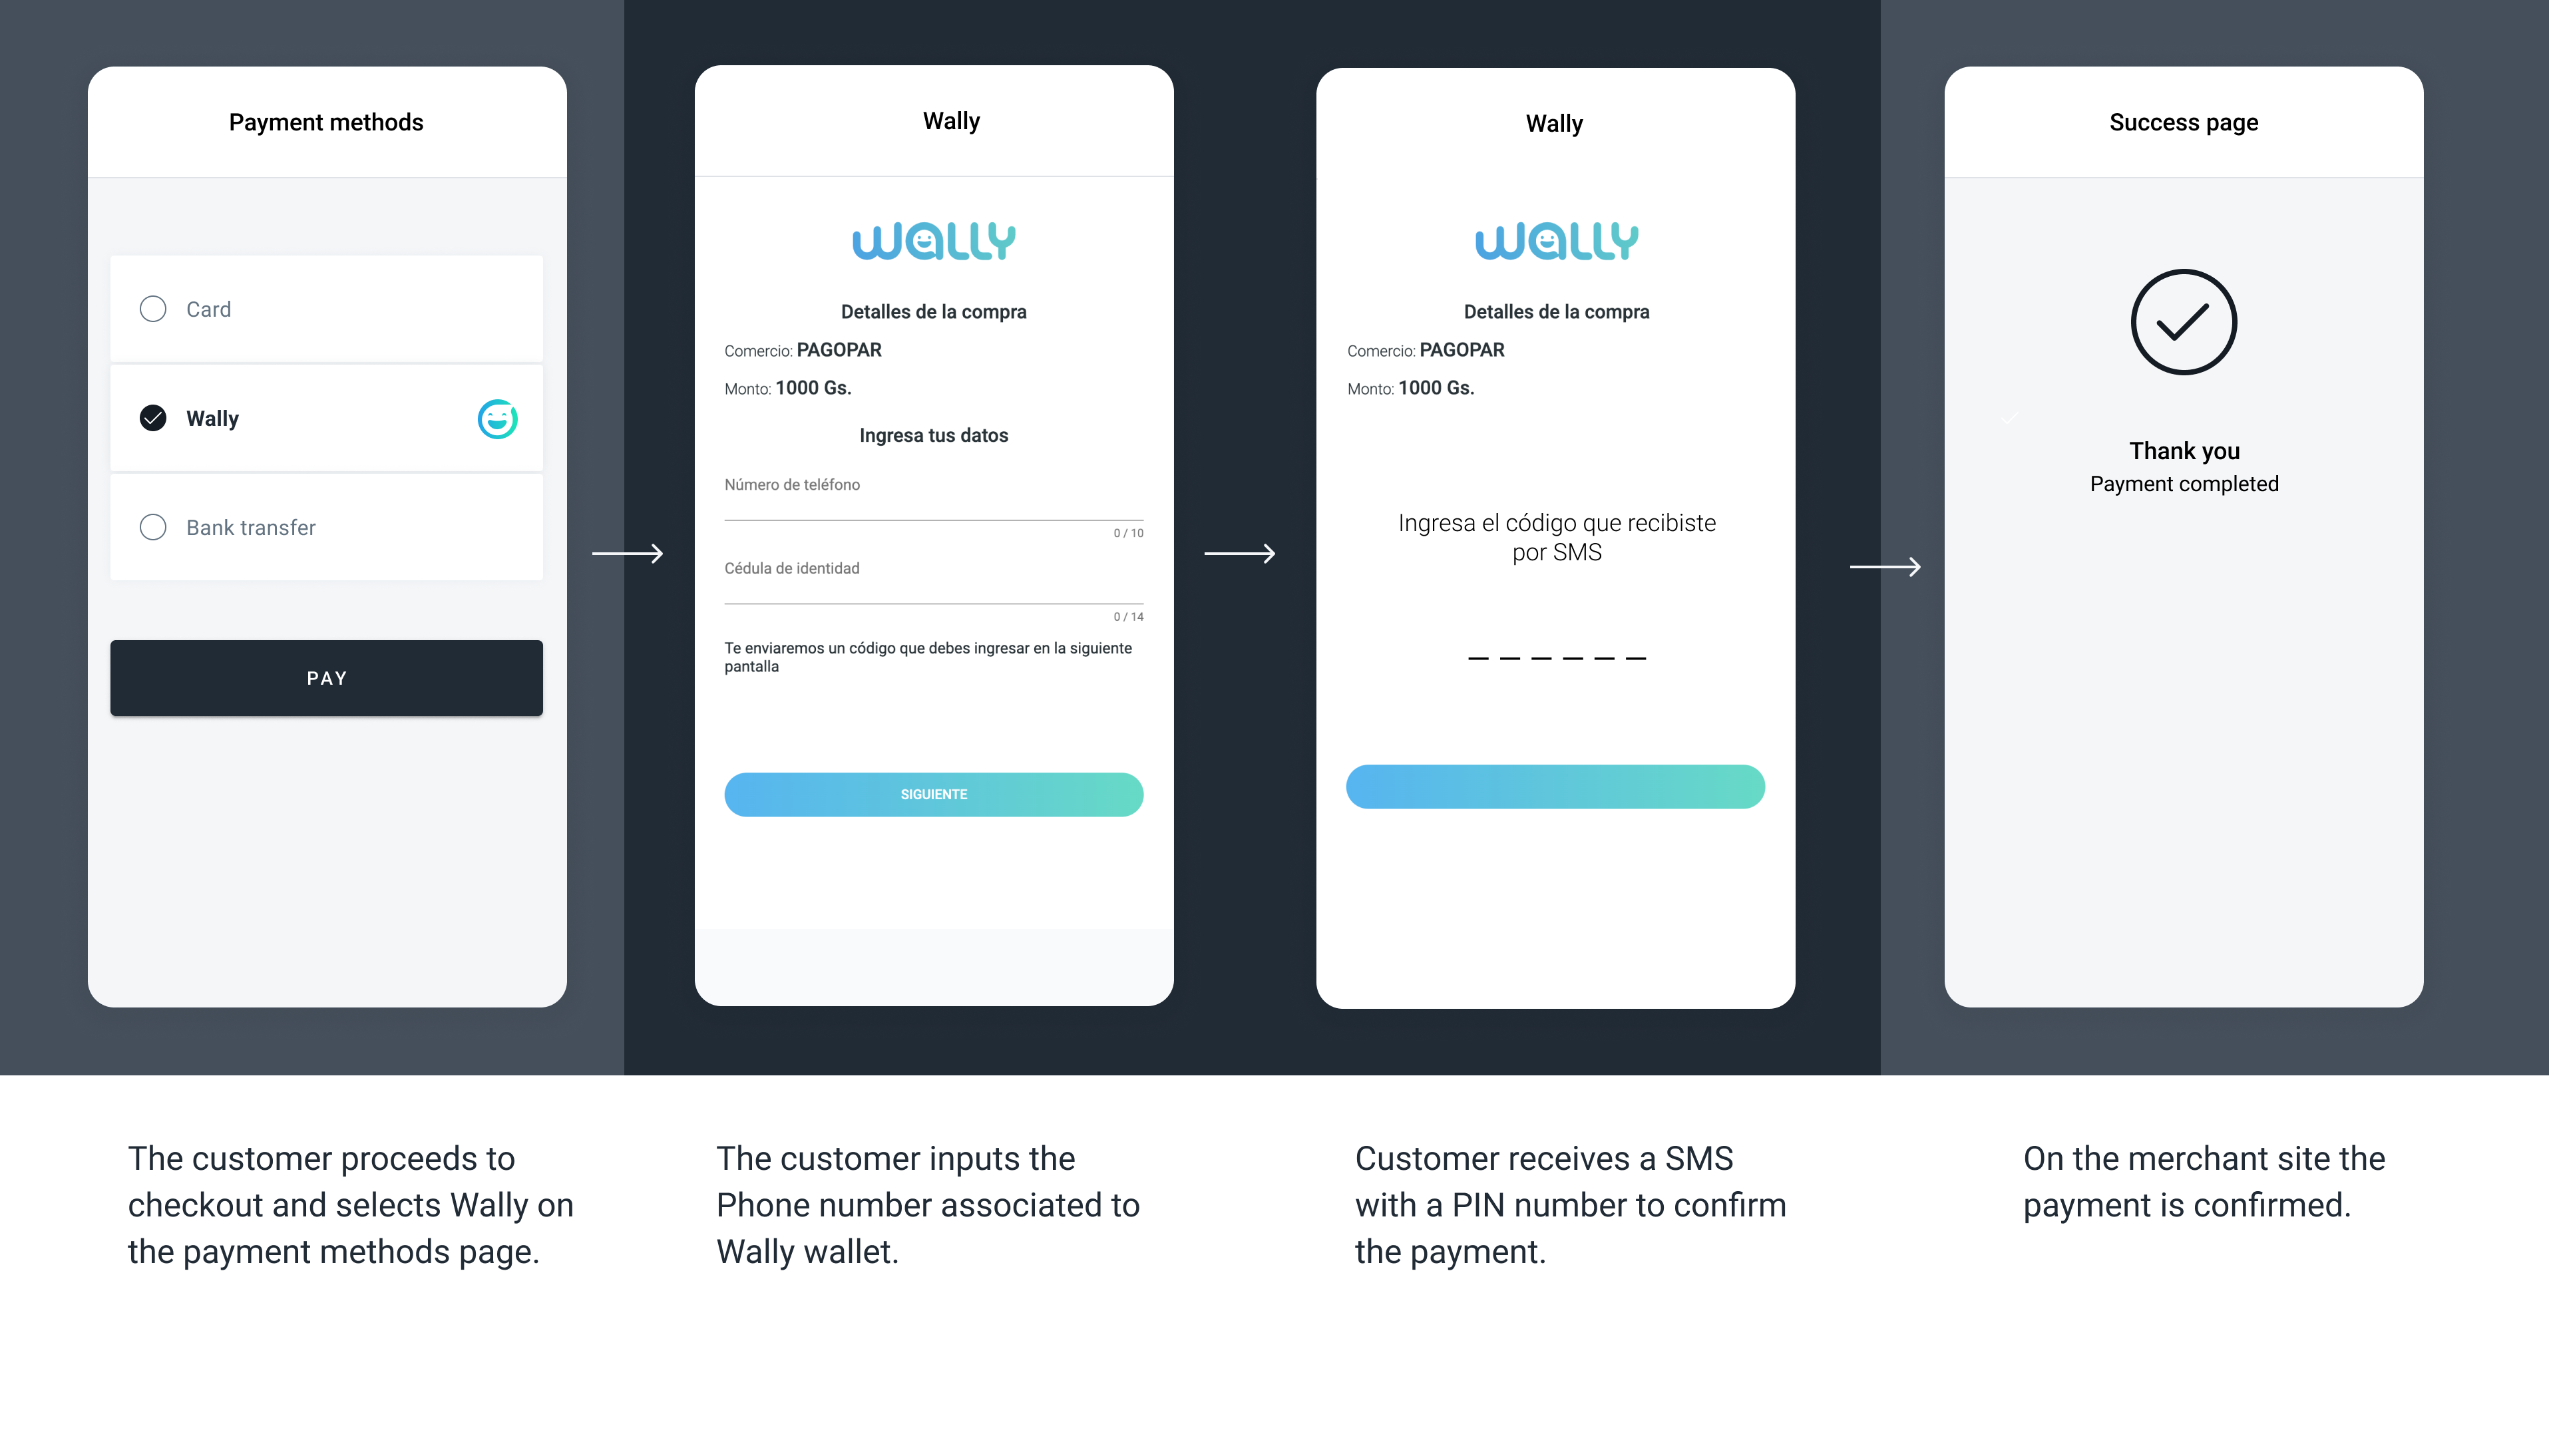 The screenshots illustrate a generic Wally payment flow.